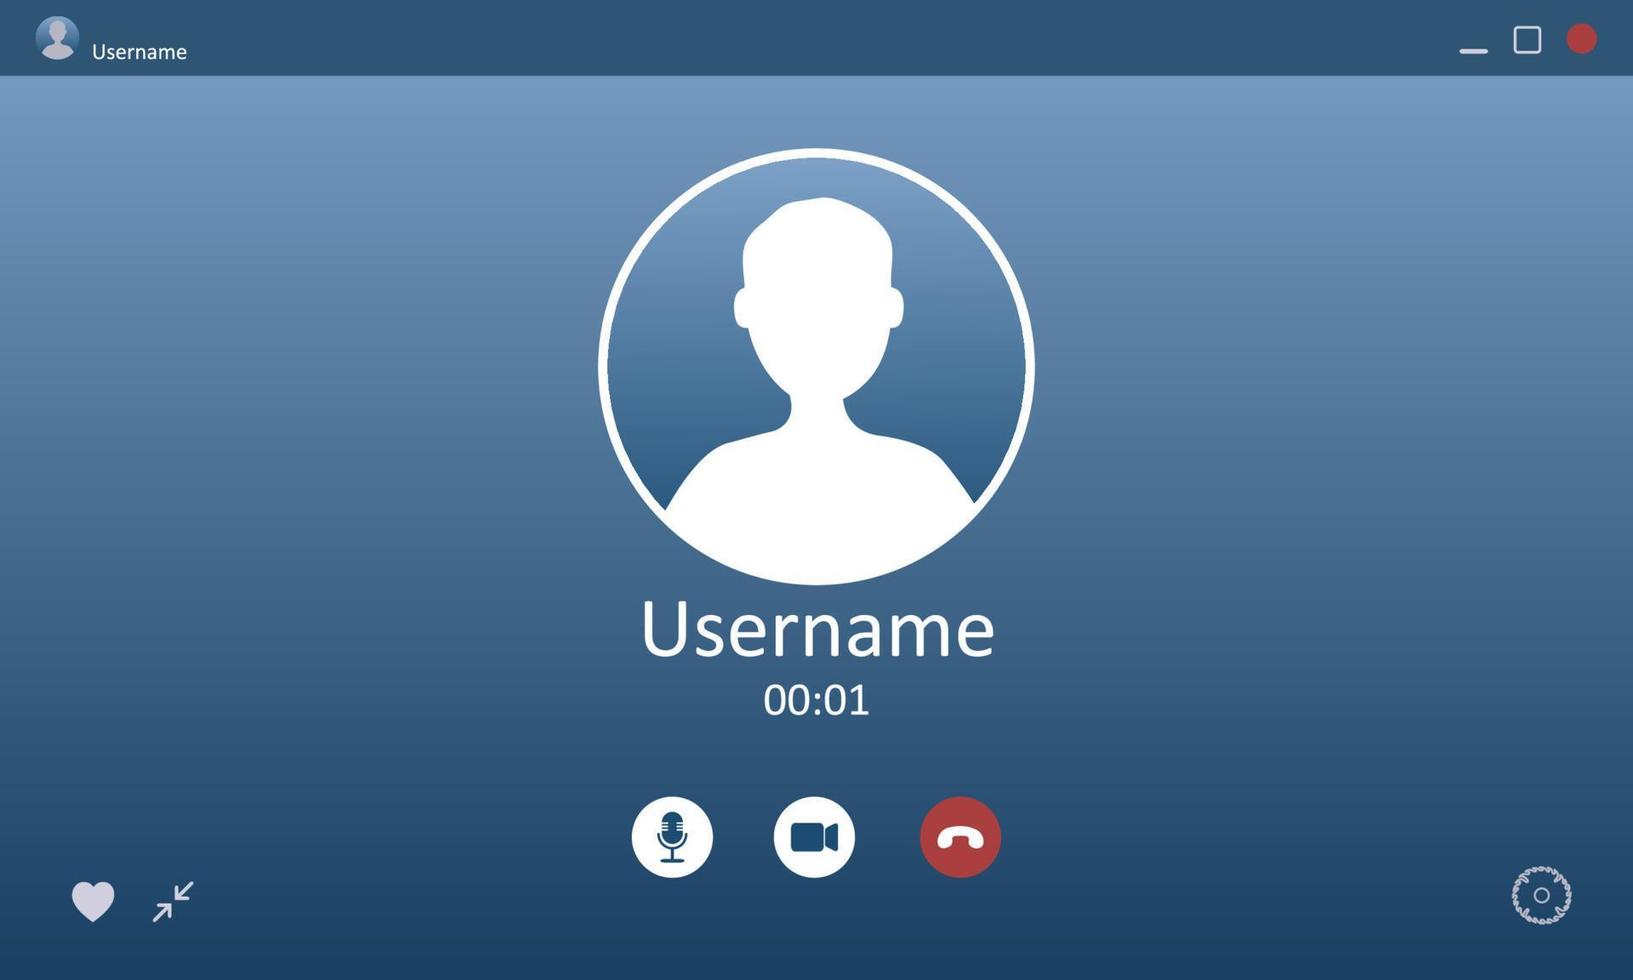 Video chat interface. User web video call window. Concept of social remote media, remote communication, video content. Modern vector illustration.